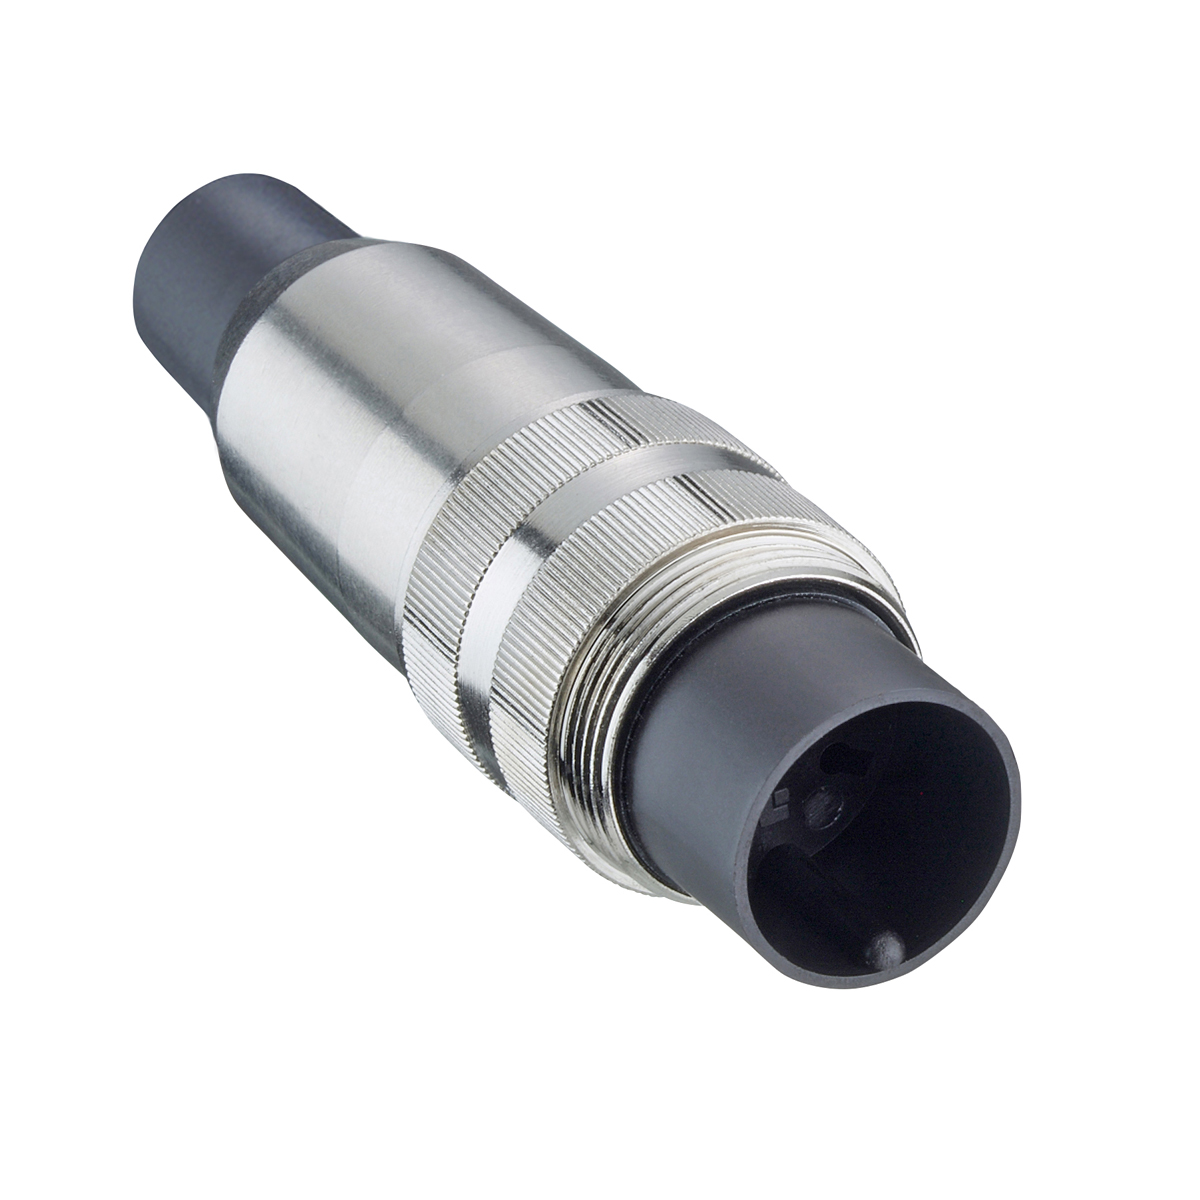 Lumberg: SV ...-8 C (Series 03 | Circular connectors with threaded joint M16 acc. to IEC 61076-2-106, IP40/IP68)